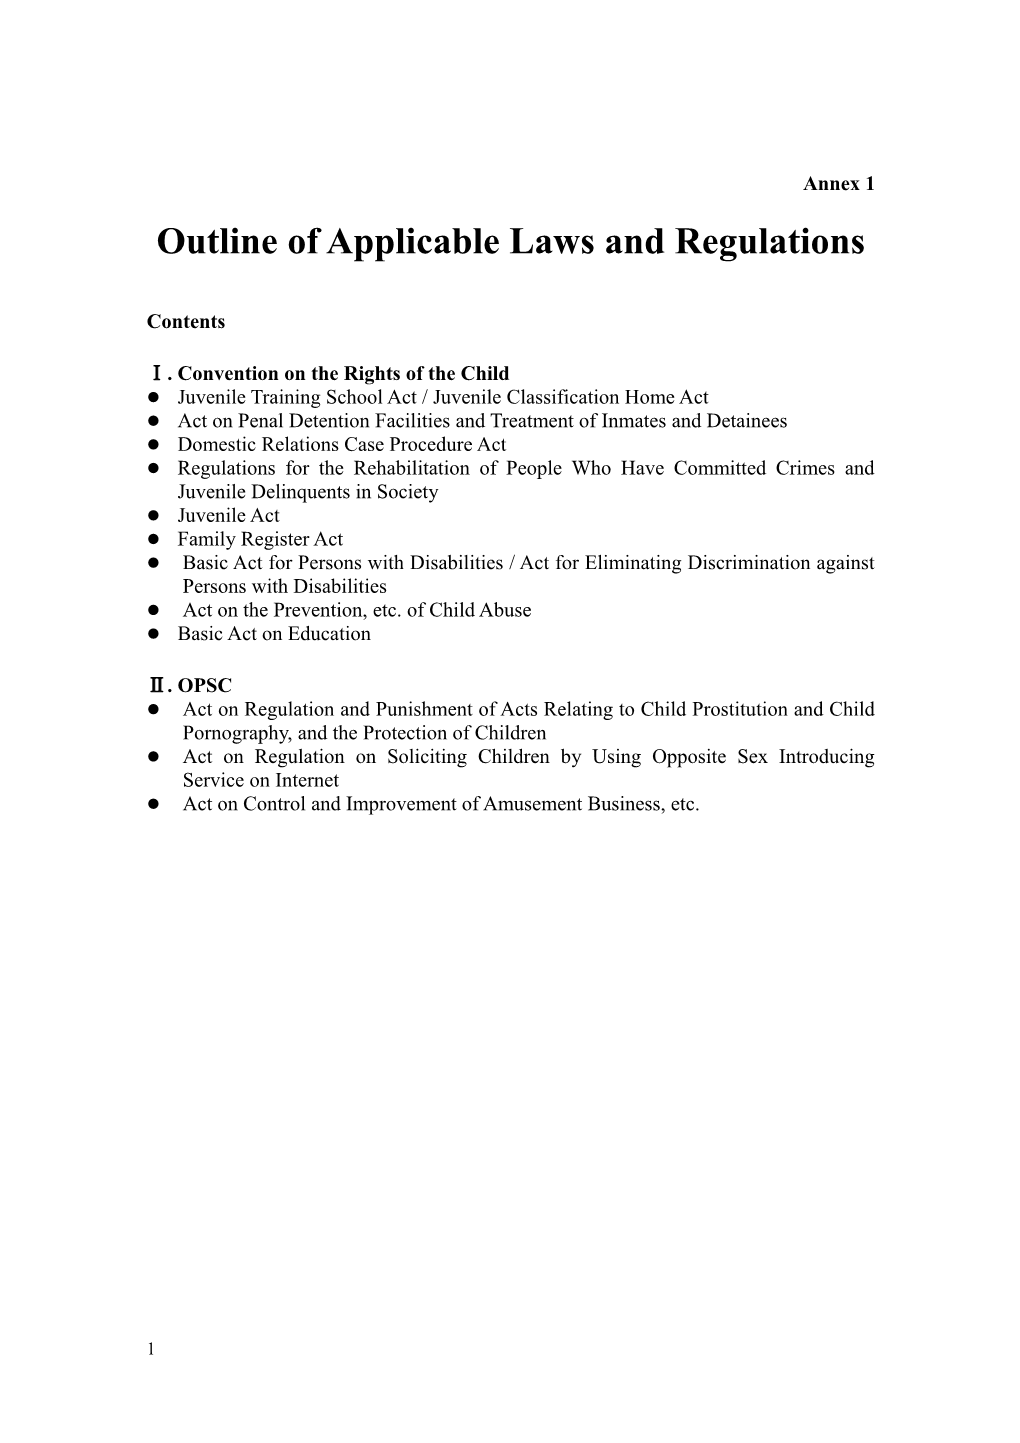 Outline of Applicable Laws and Regulations